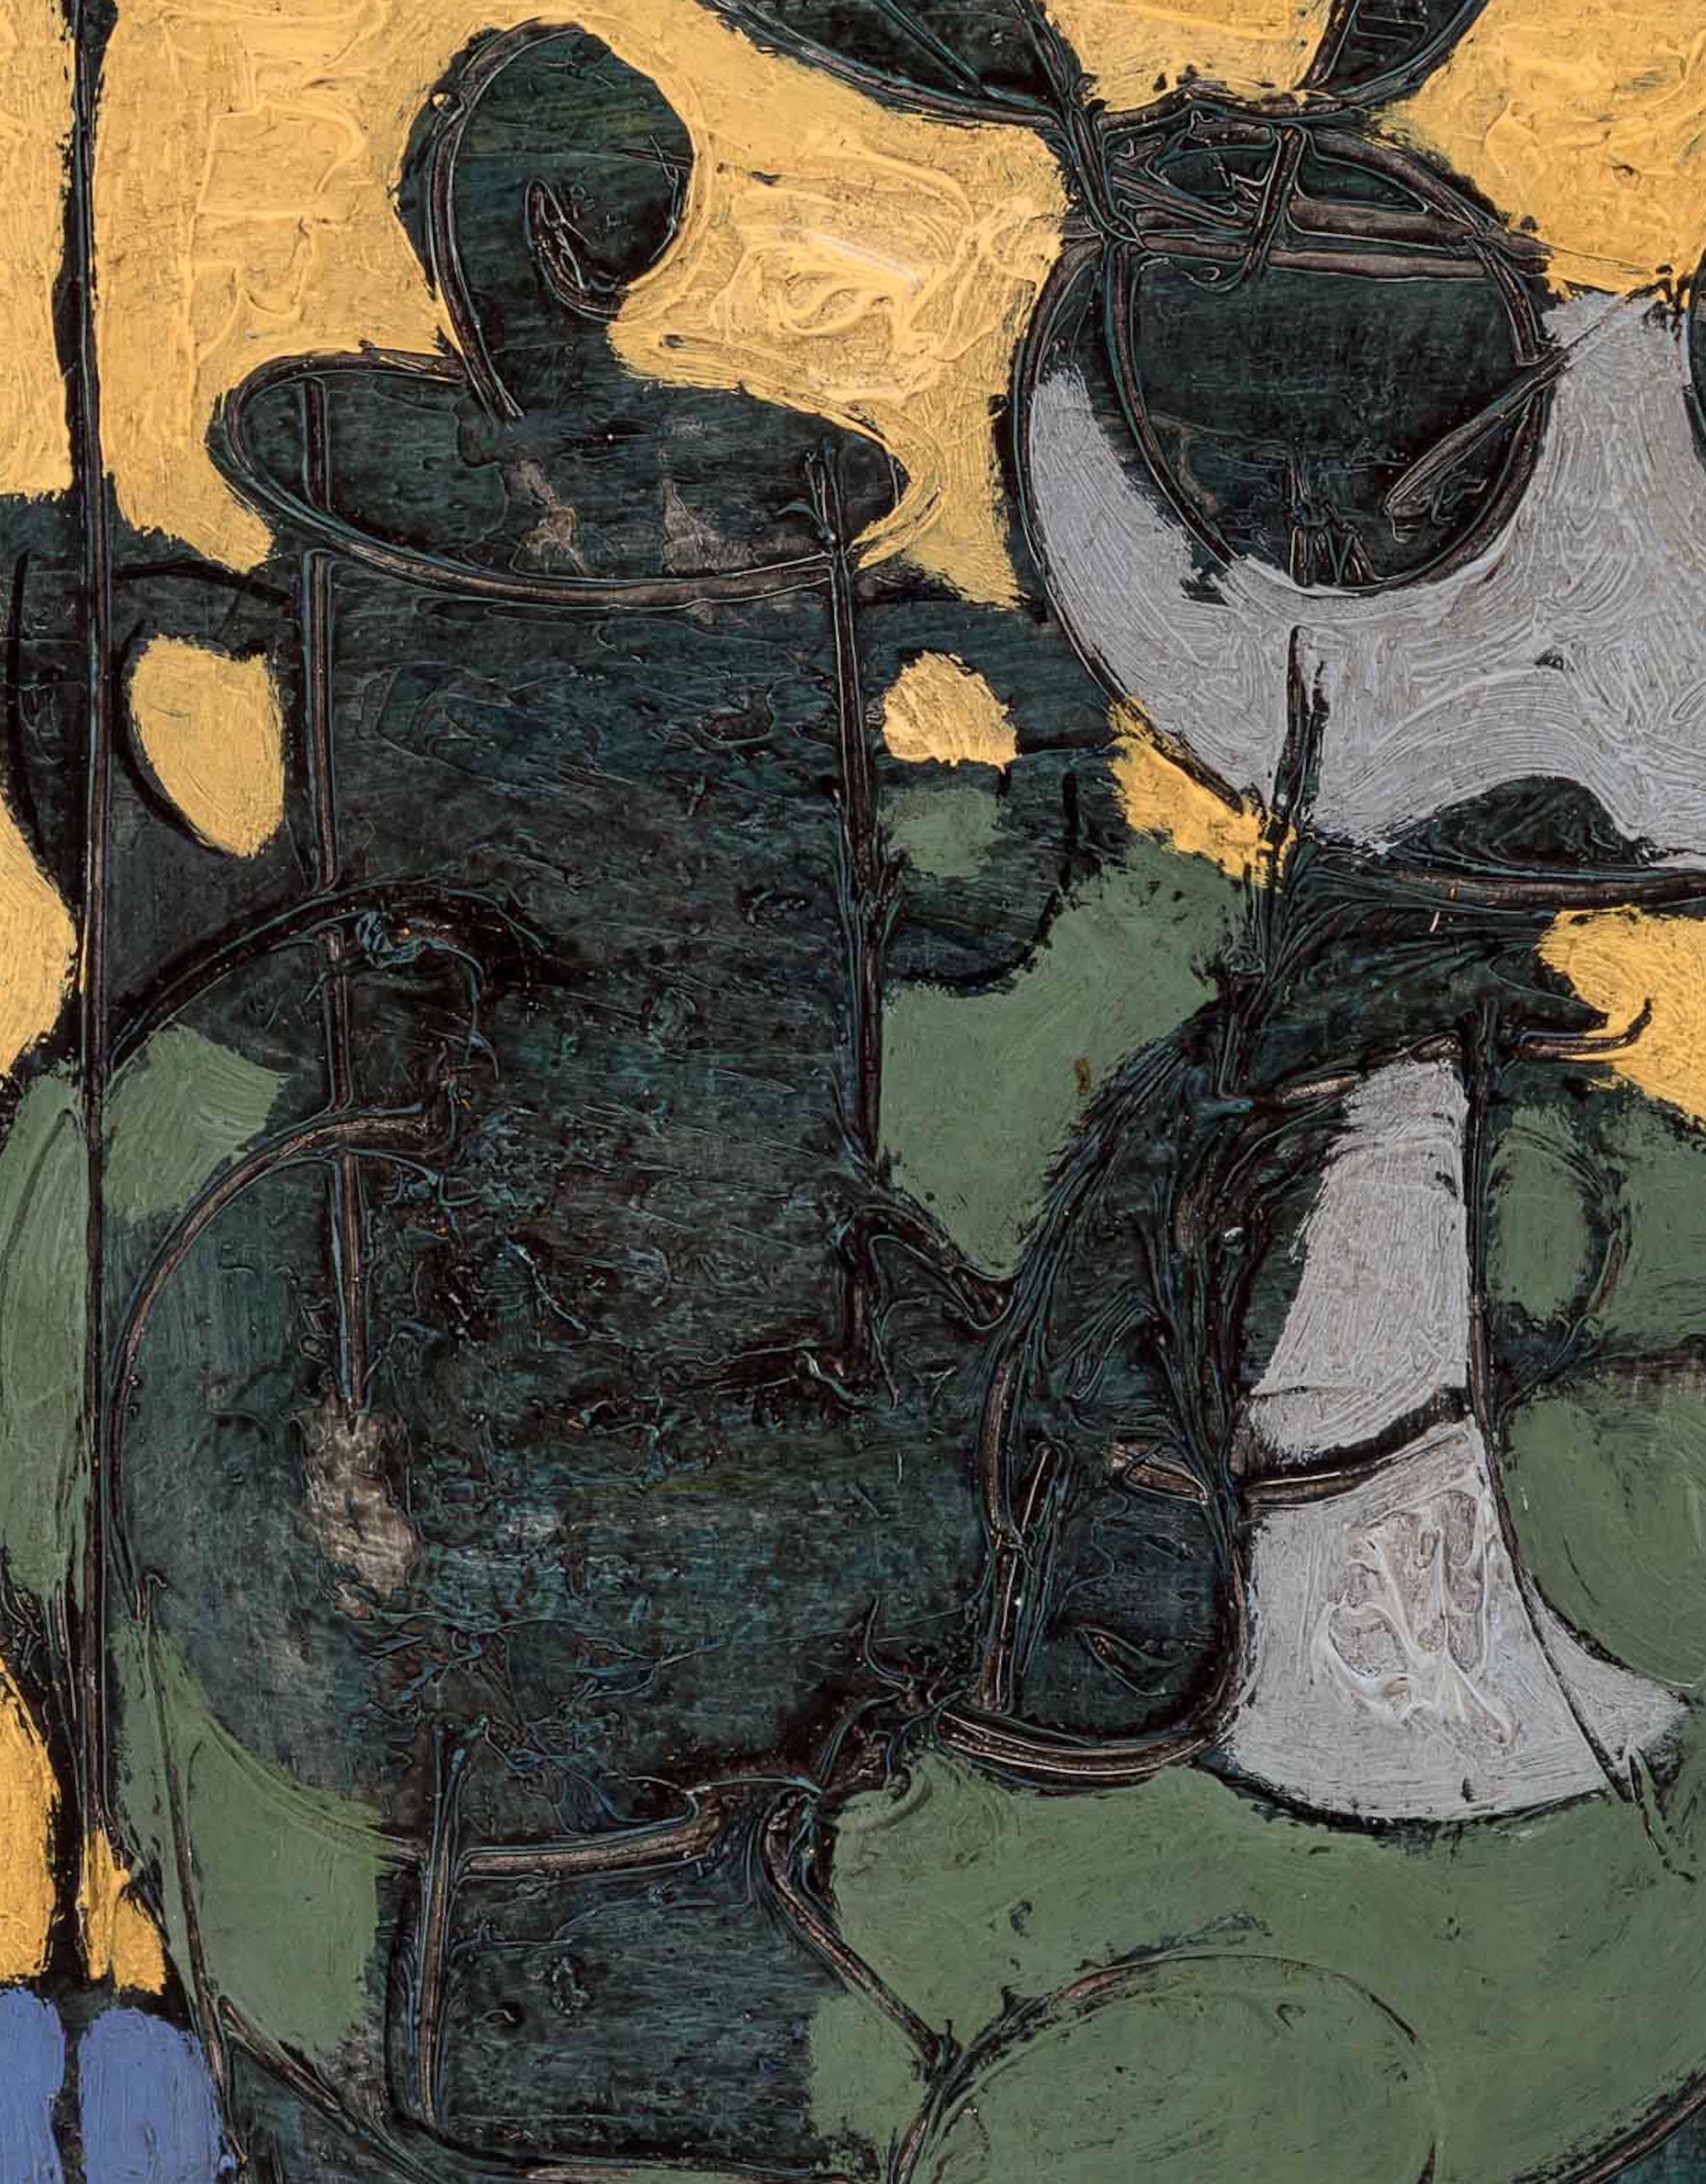 Yellow & Green Still Life painting of a coffee pot 'Cafietiere avec des Fruits'